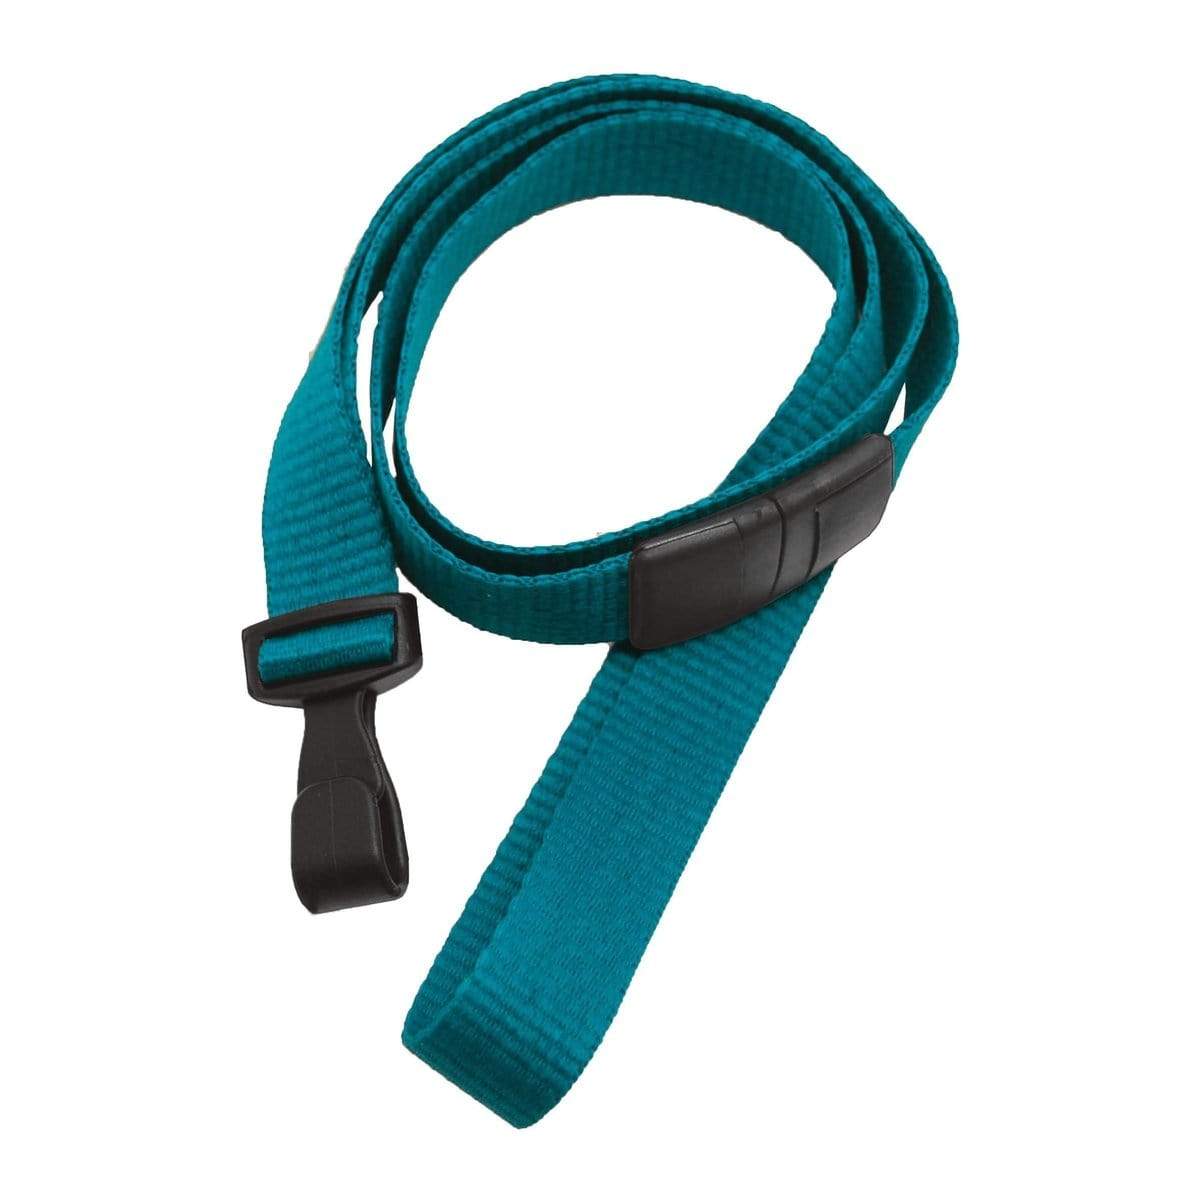 Teal Wide 5/8" Lanyard with No Twist Plastic Hook (2138-478X) 2138-4787